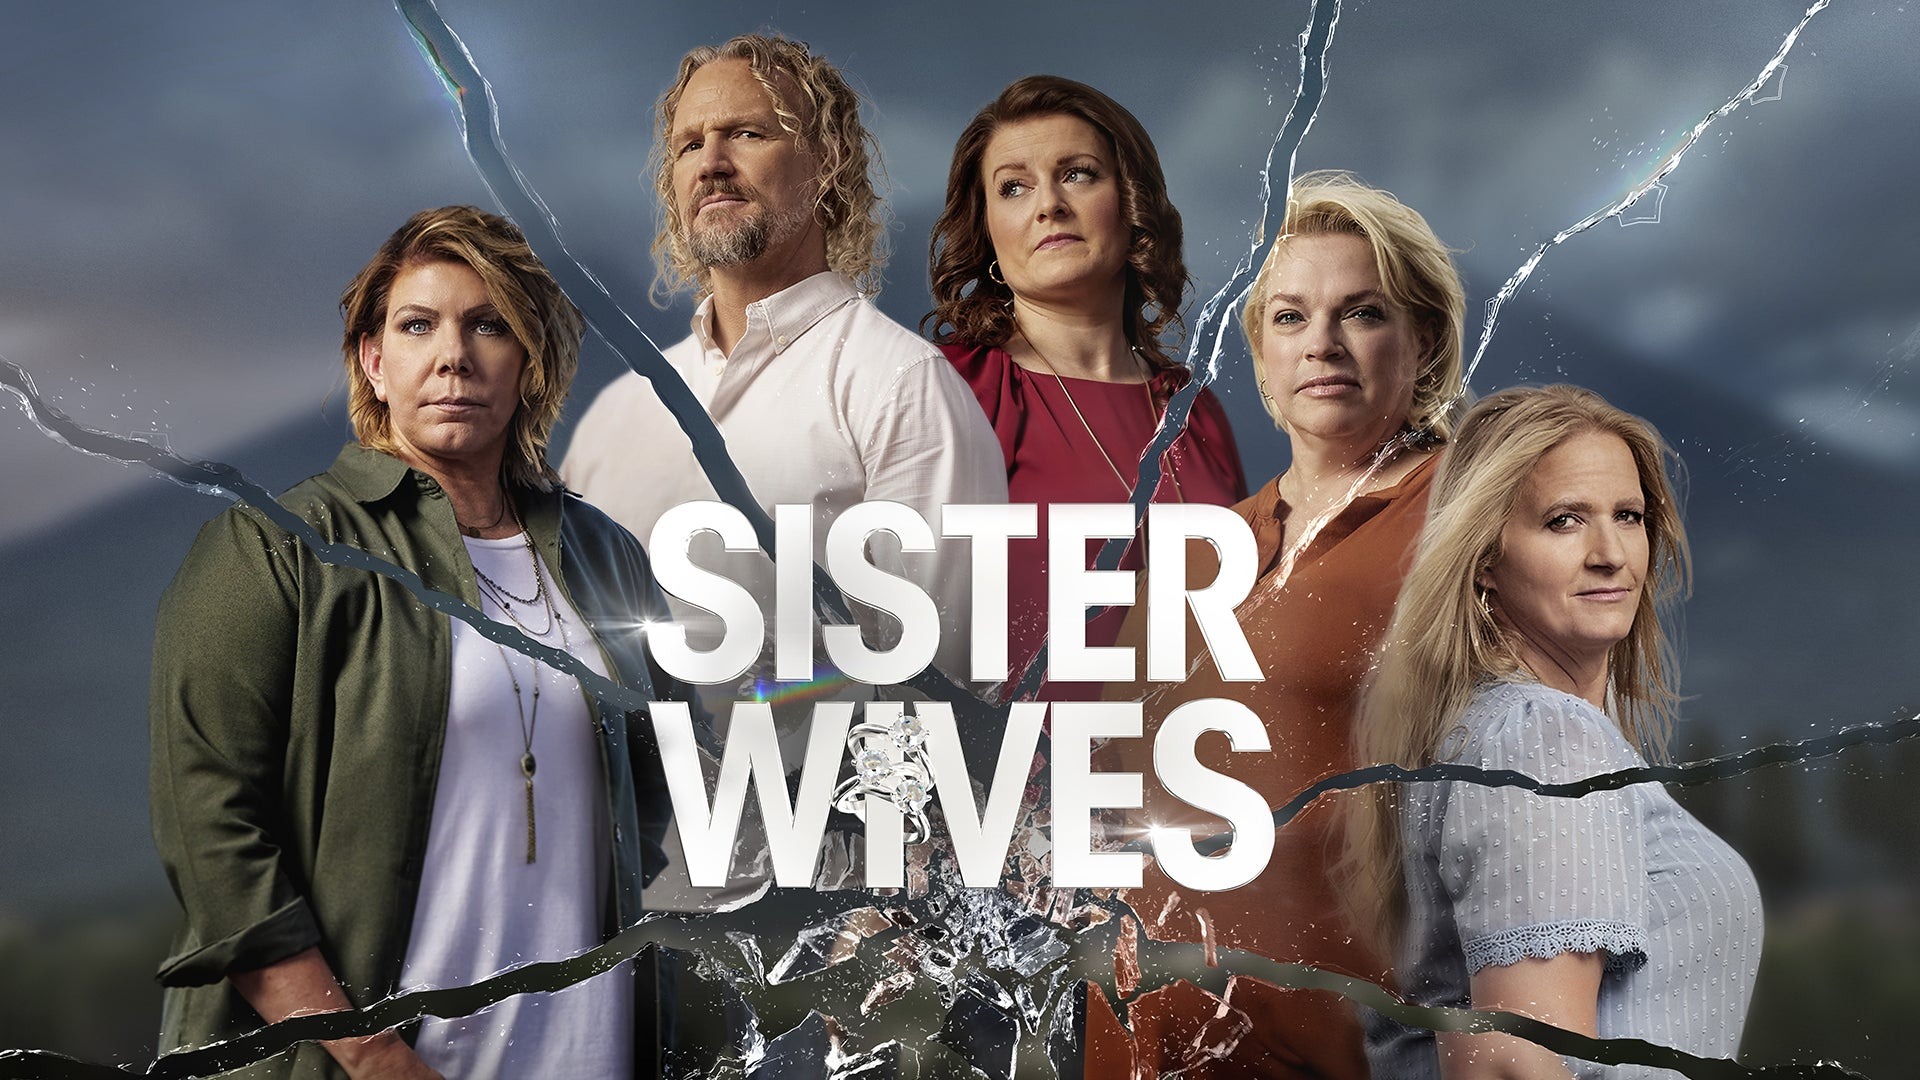 Sister Wives Season 18 of Reality Series Gets Premiere Date on TLC